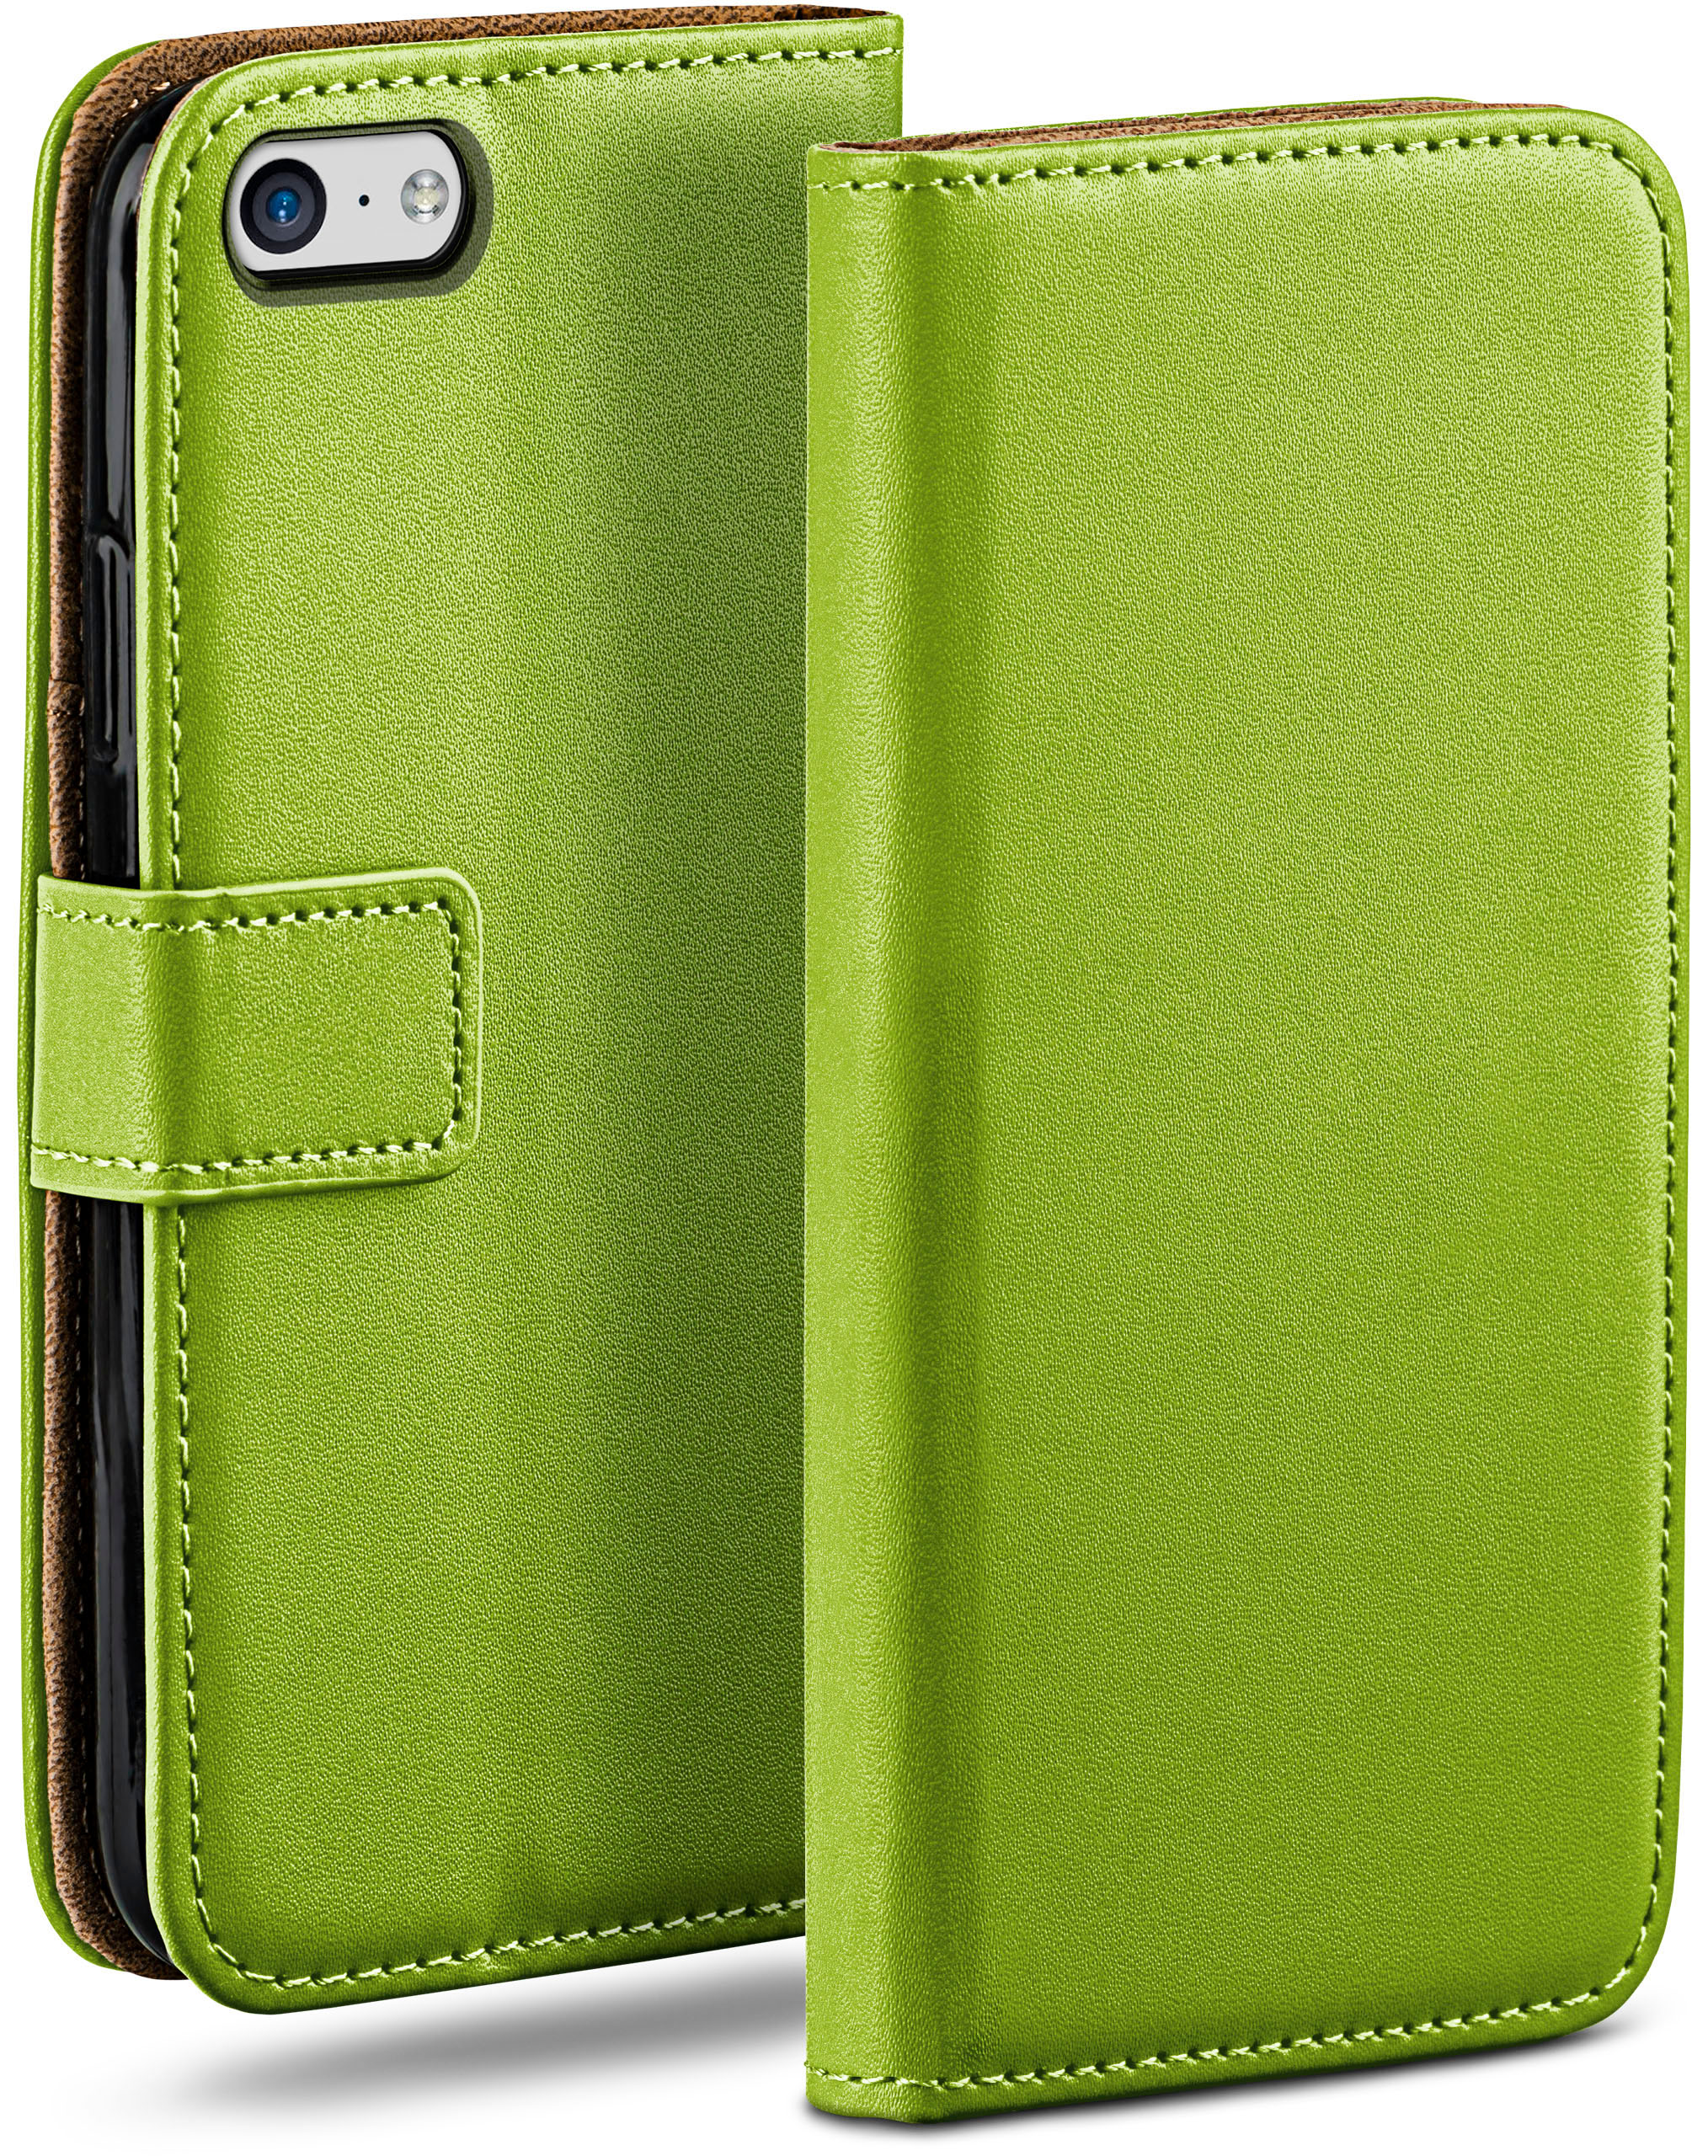 Lime-Green Case, Book Apple, MOEX 5c, iPhone Bookcover,